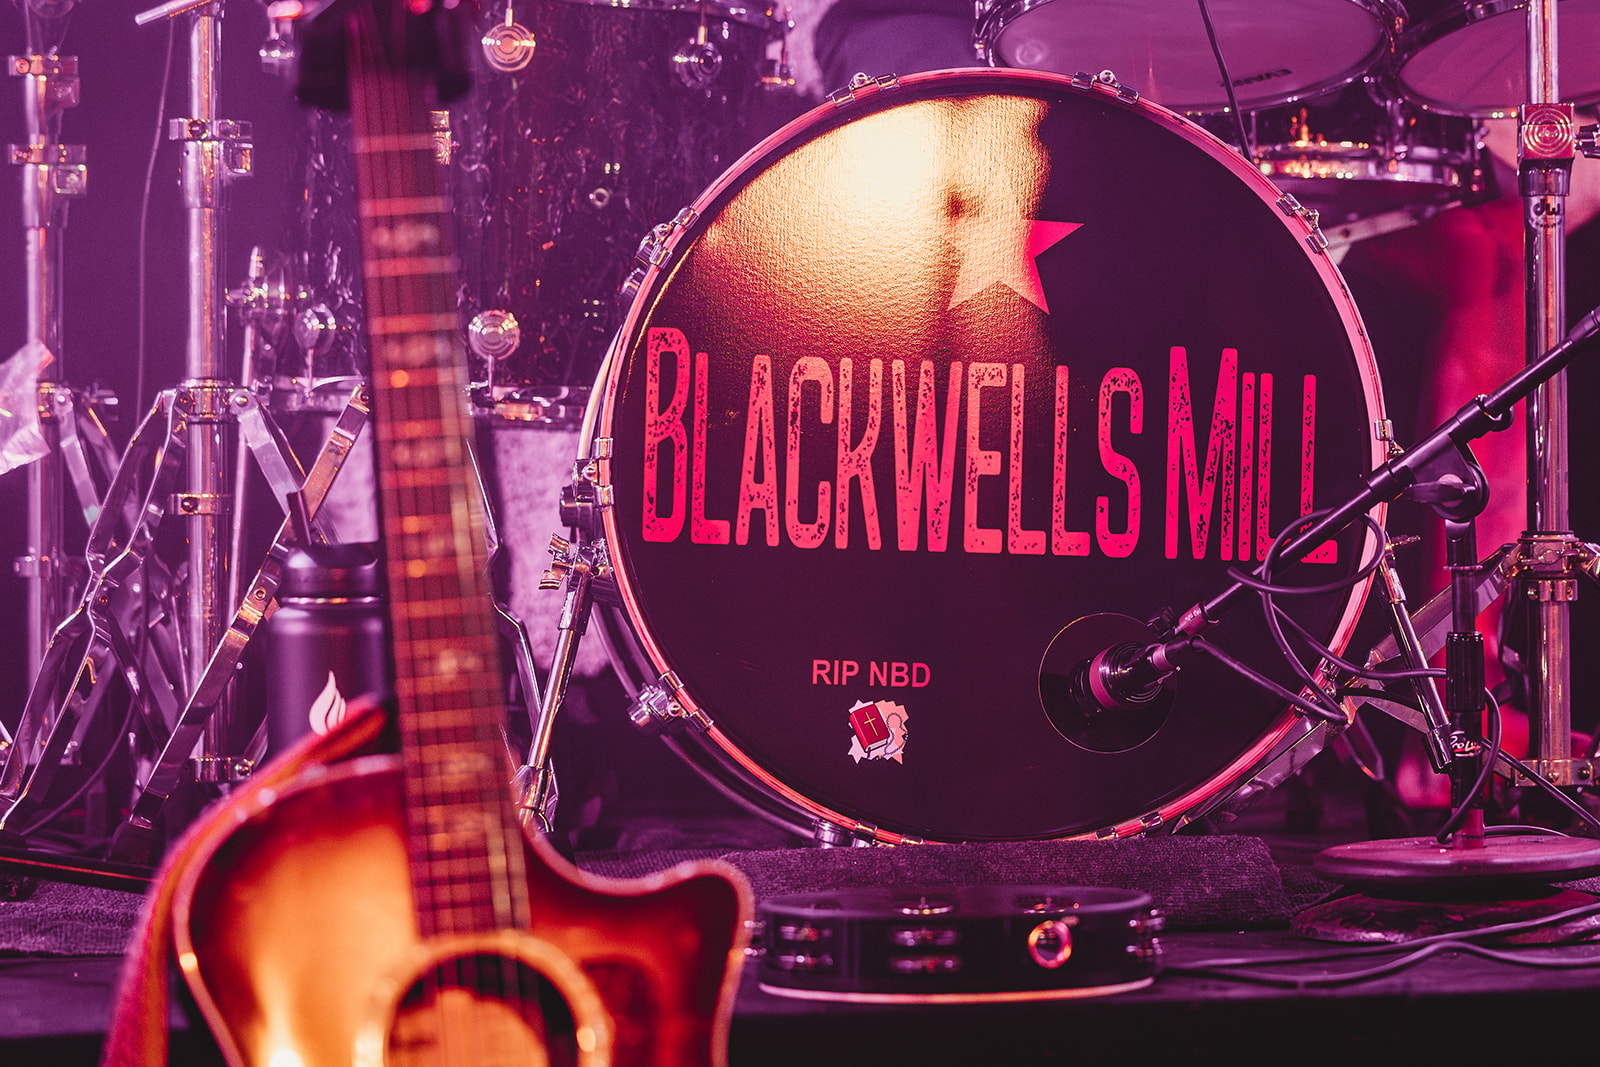 Blackwells Mill rock band rebranding concert performance shoot at The Stone Pony in Asbury Park New Jersey